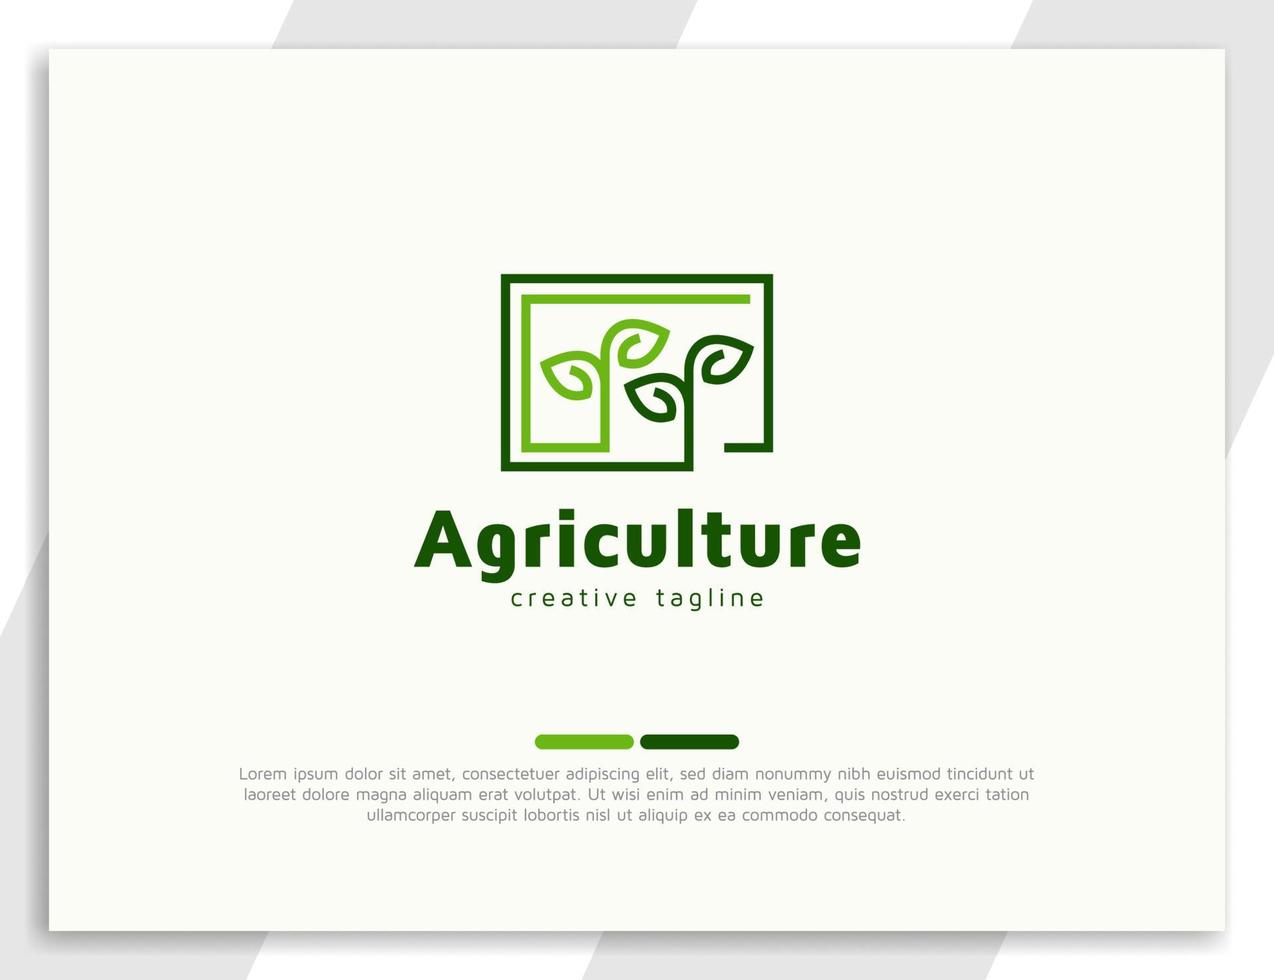 Agriculture sprout plant logo illustration design template vector